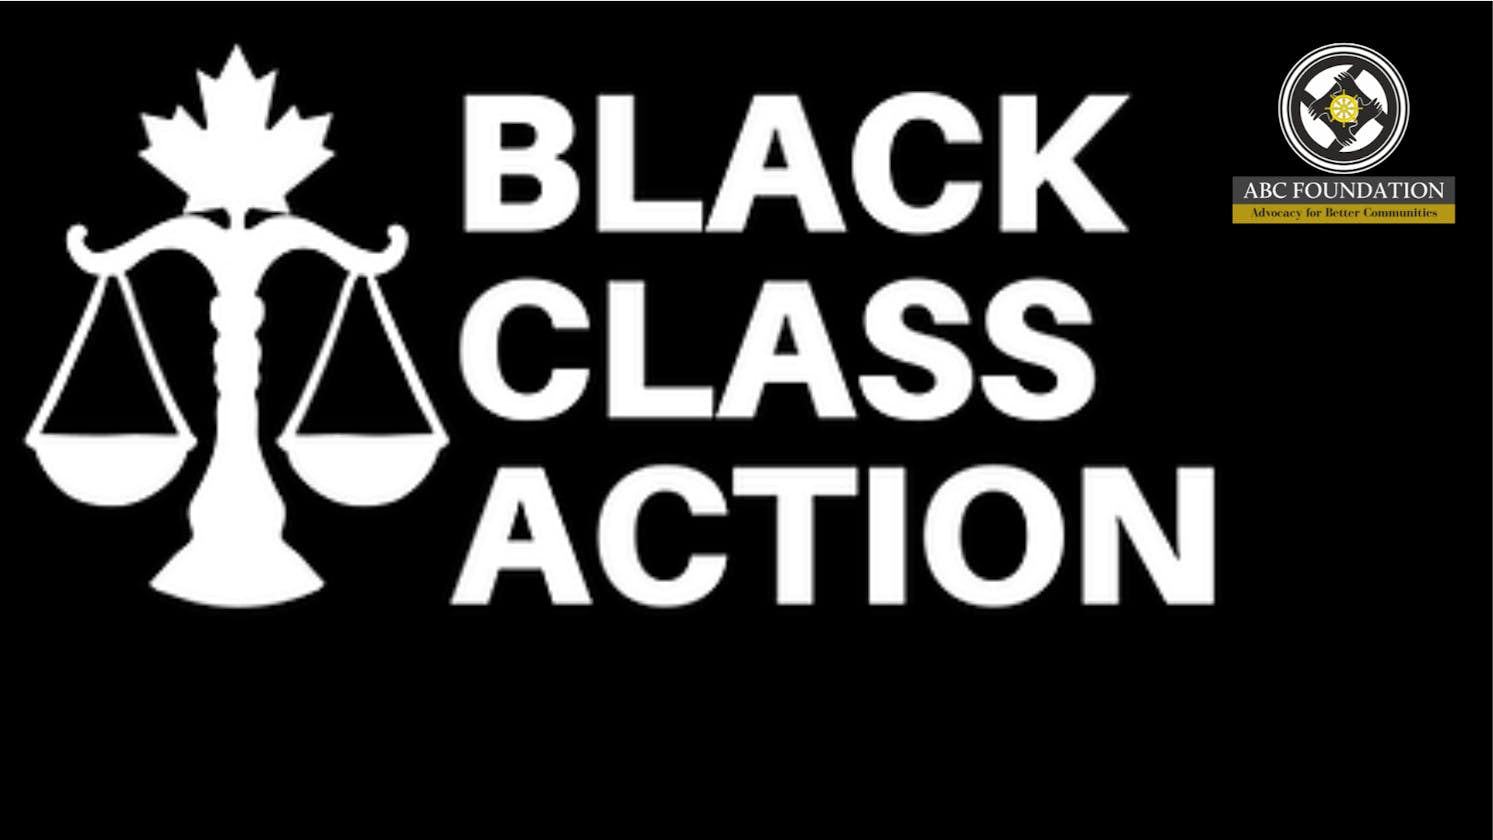 Cover Image for Racial Discrimination in the Workplace: The Black Class Action